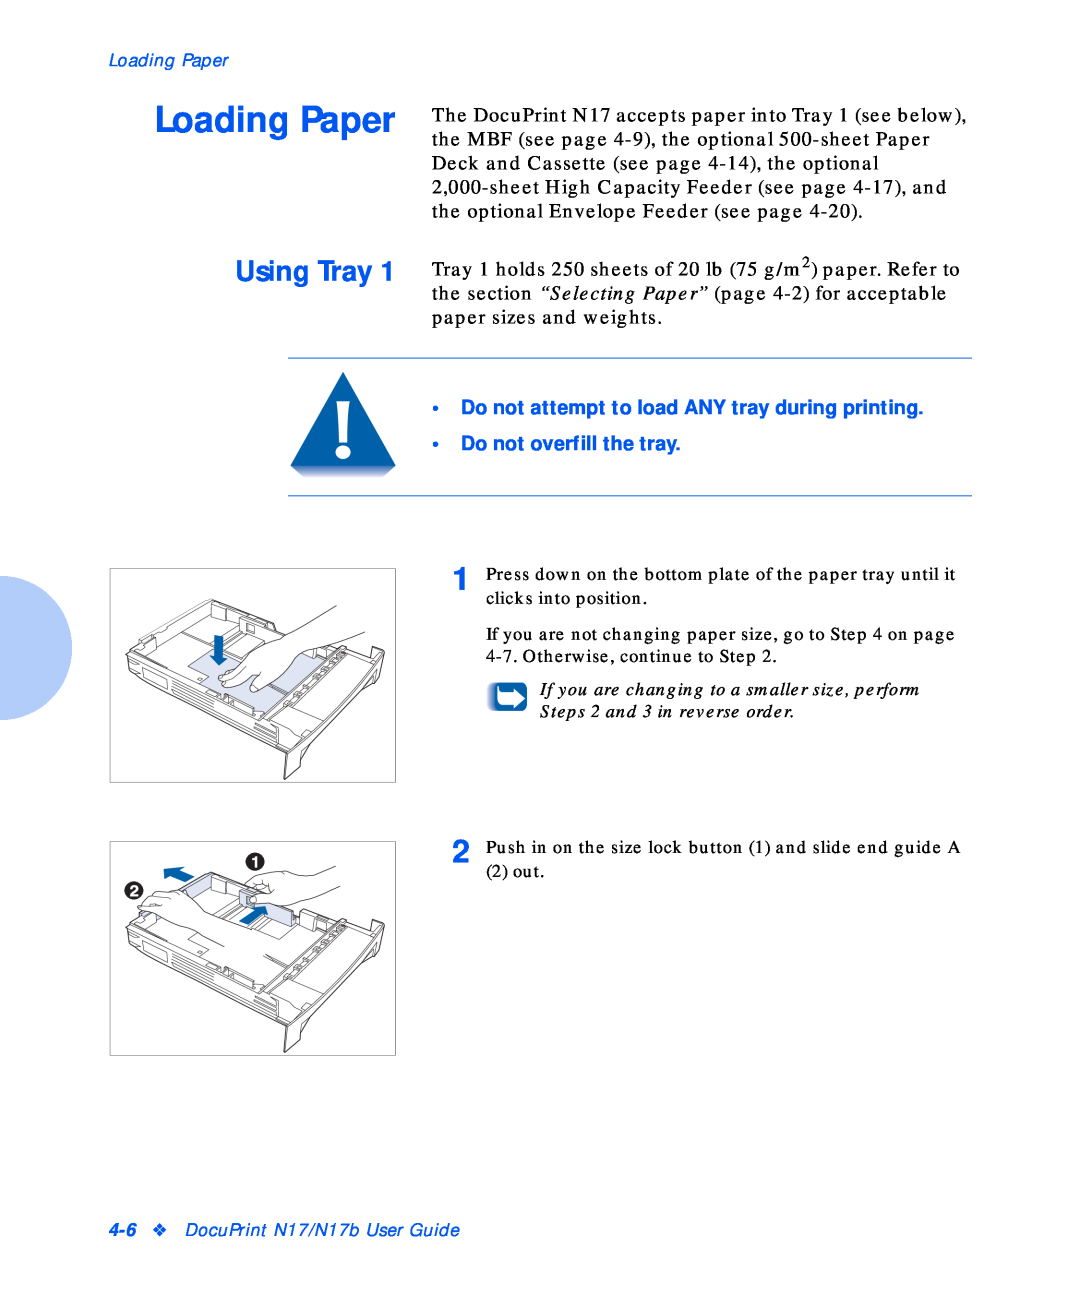 Xerox N17b manual Loading Paper, •Do not attempt to load ANY tray during printing, •Do not overfill the tray 